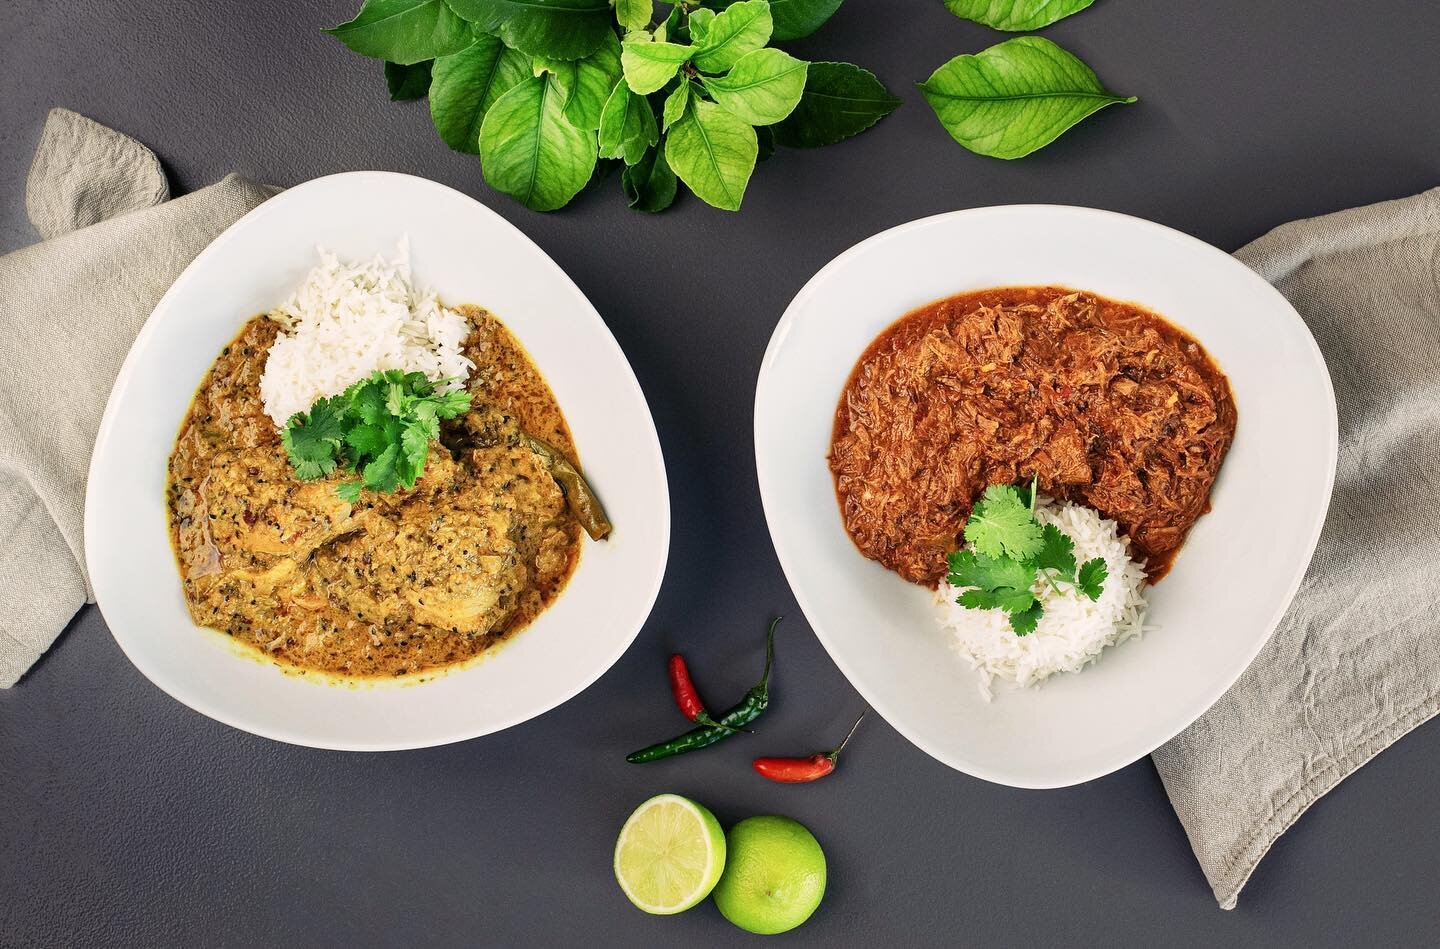 Our slow food stars - Cape Malay Chicken Curry and Rogan Josh Lamb Curry 🌶 Our food choices affect the world around us, that&rsquo;s why we use @fenshams_sa pasture raised chicken and only the best ethical local produce.